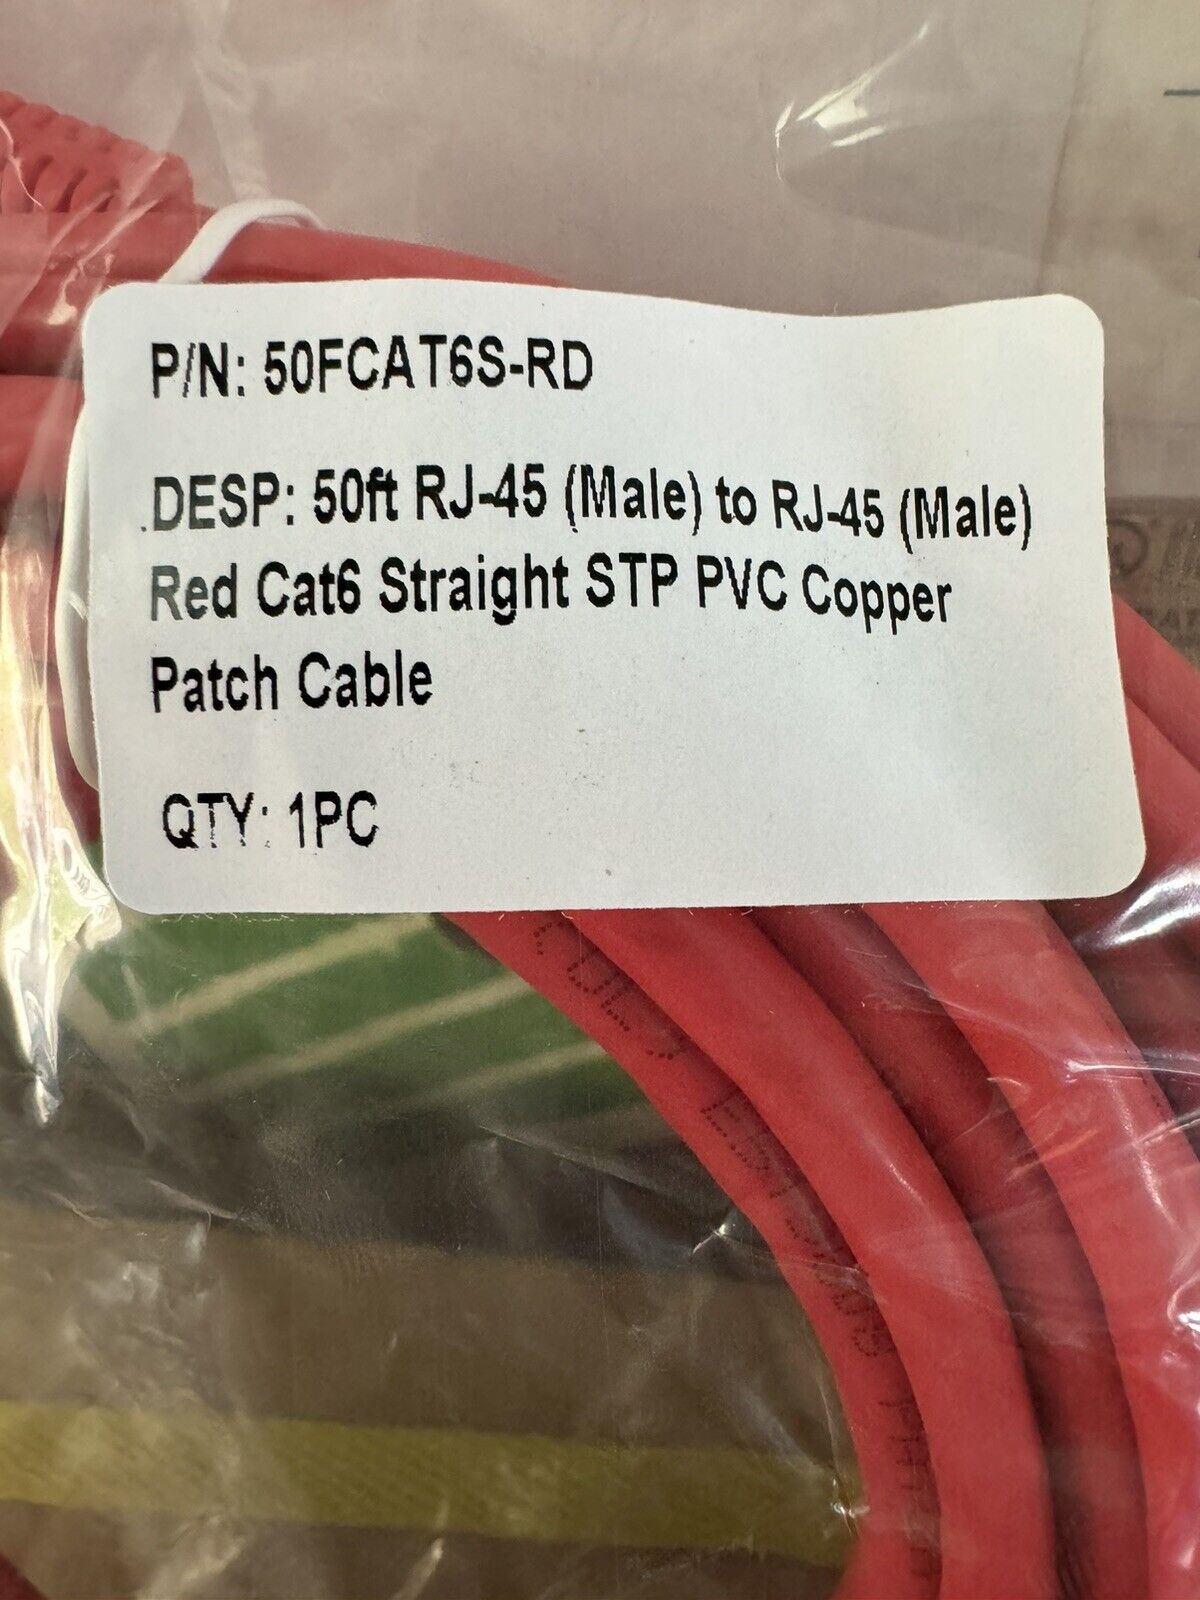 Cat 6 RED Ethernet Cable 50FT RJ-45 (MALE) TO RJ-45 (MALE) SHIELDED